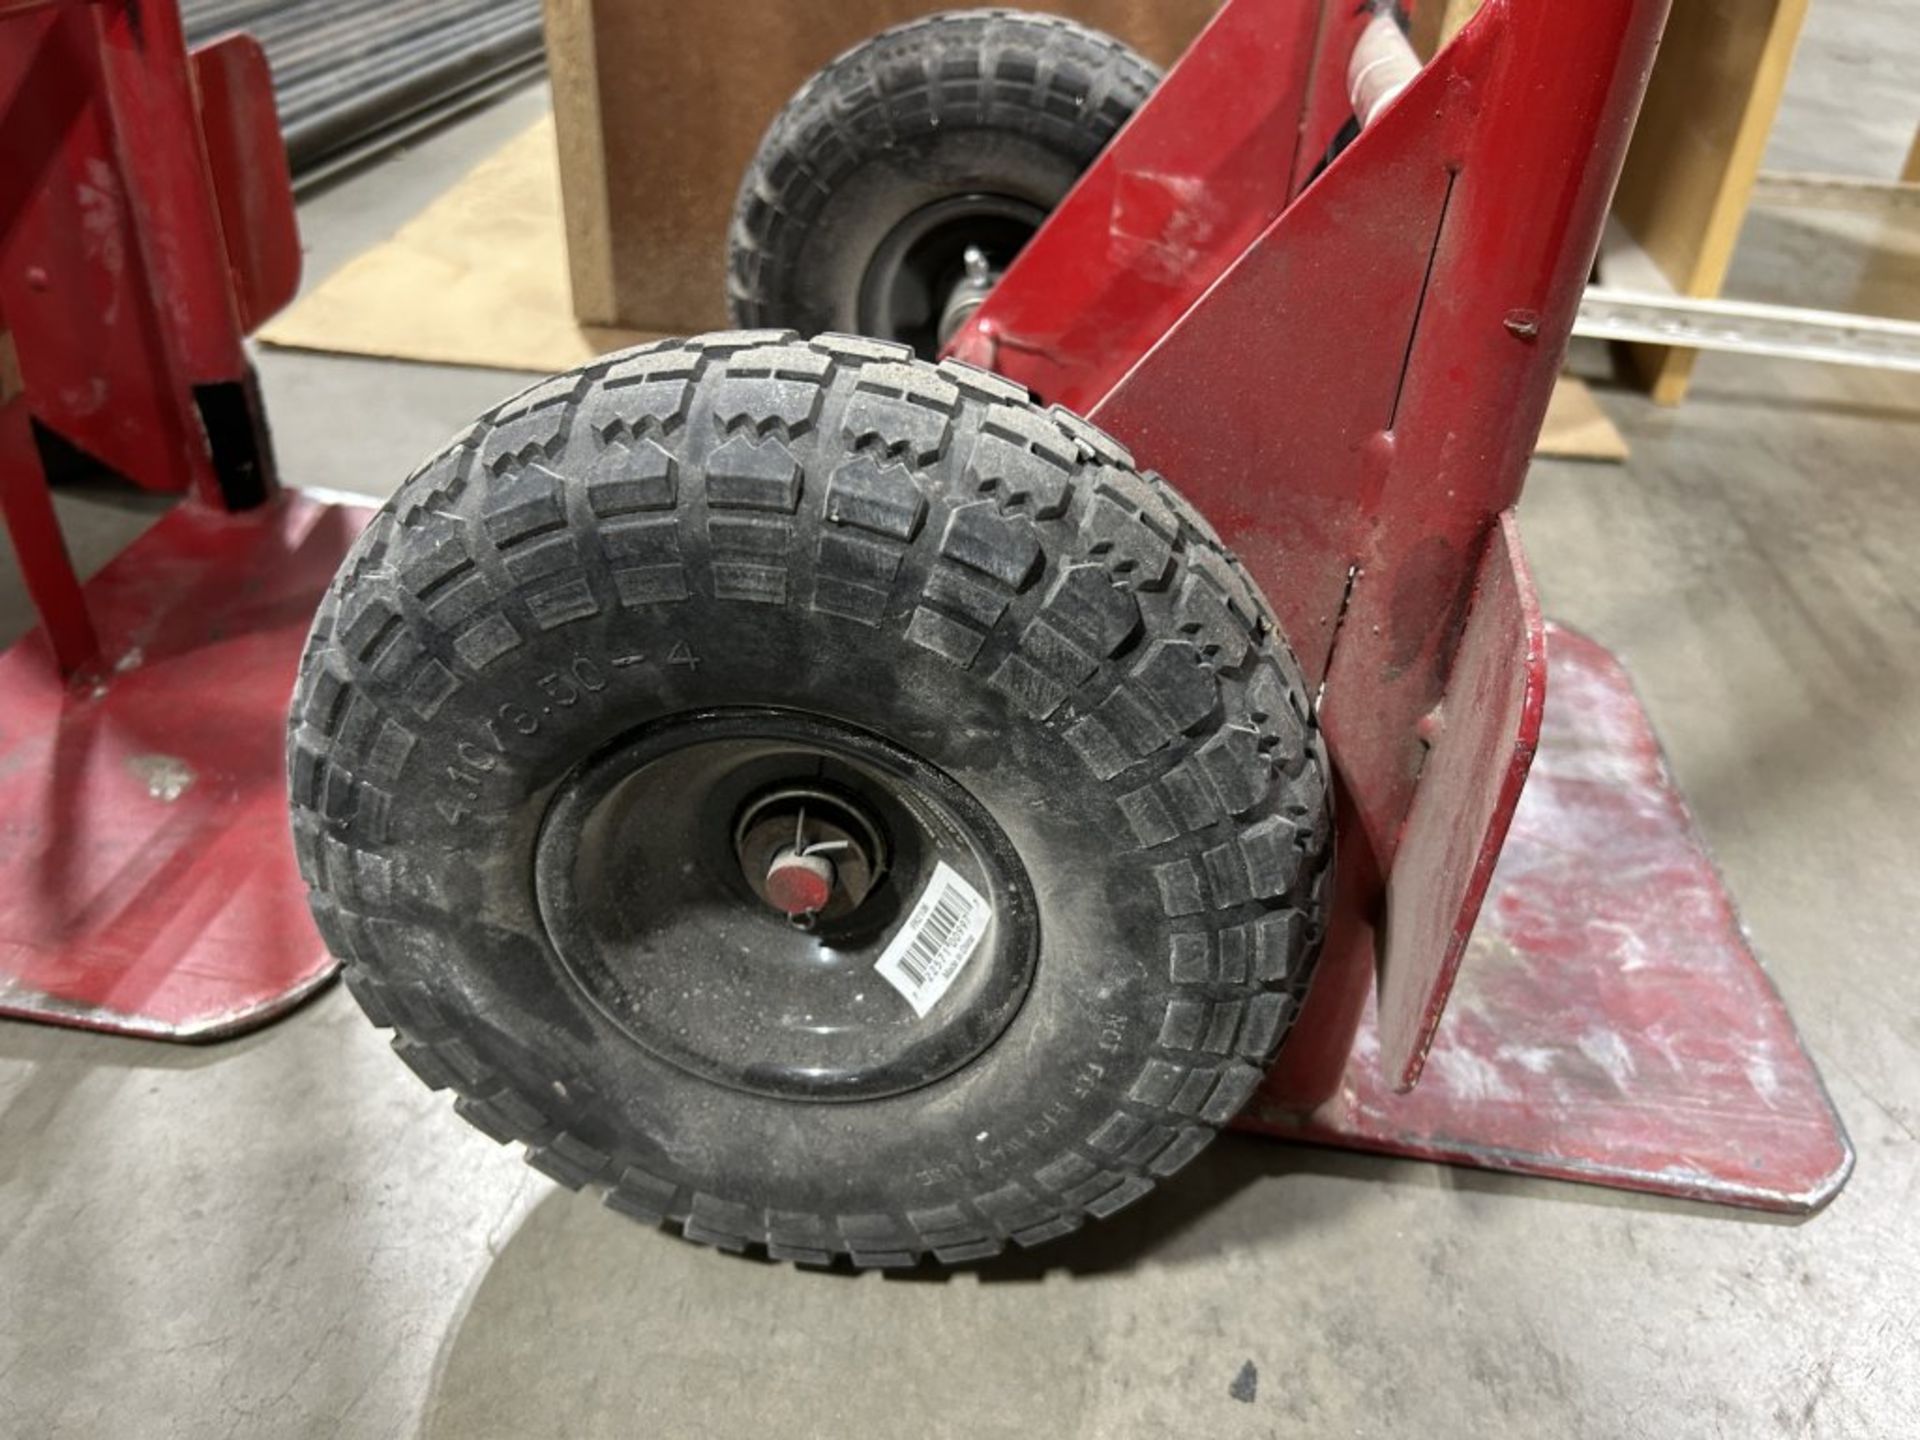 HAND TRUCKS, WITH PNEUMATIC TIRES (2) - Image 5 of 5